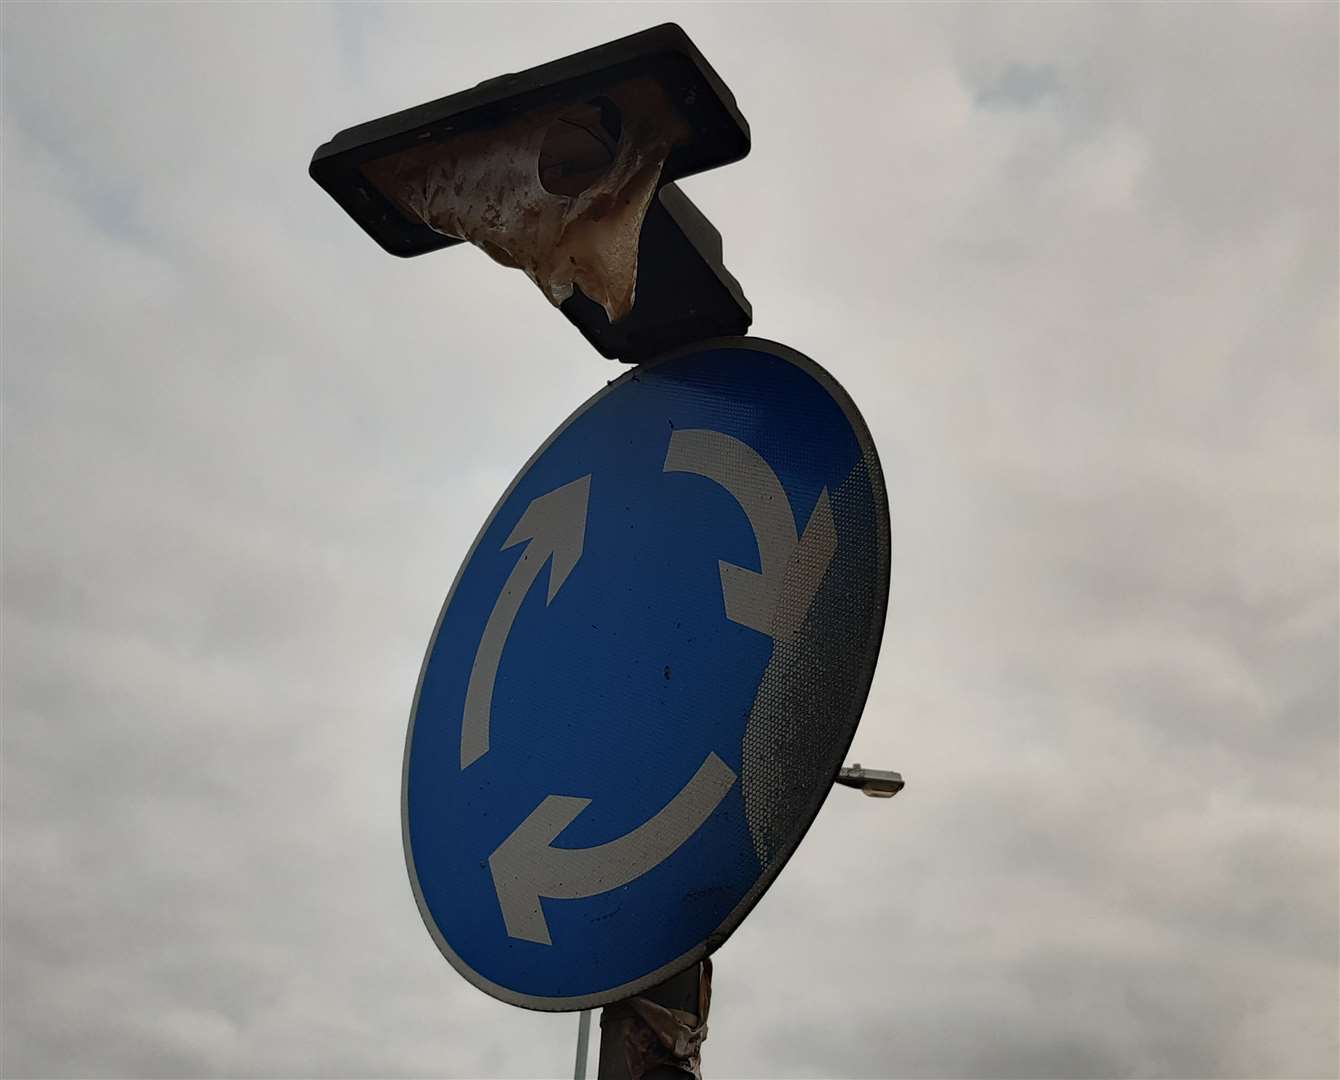 A street sign lamp had melted following the incident in Beechings Way, Twydall